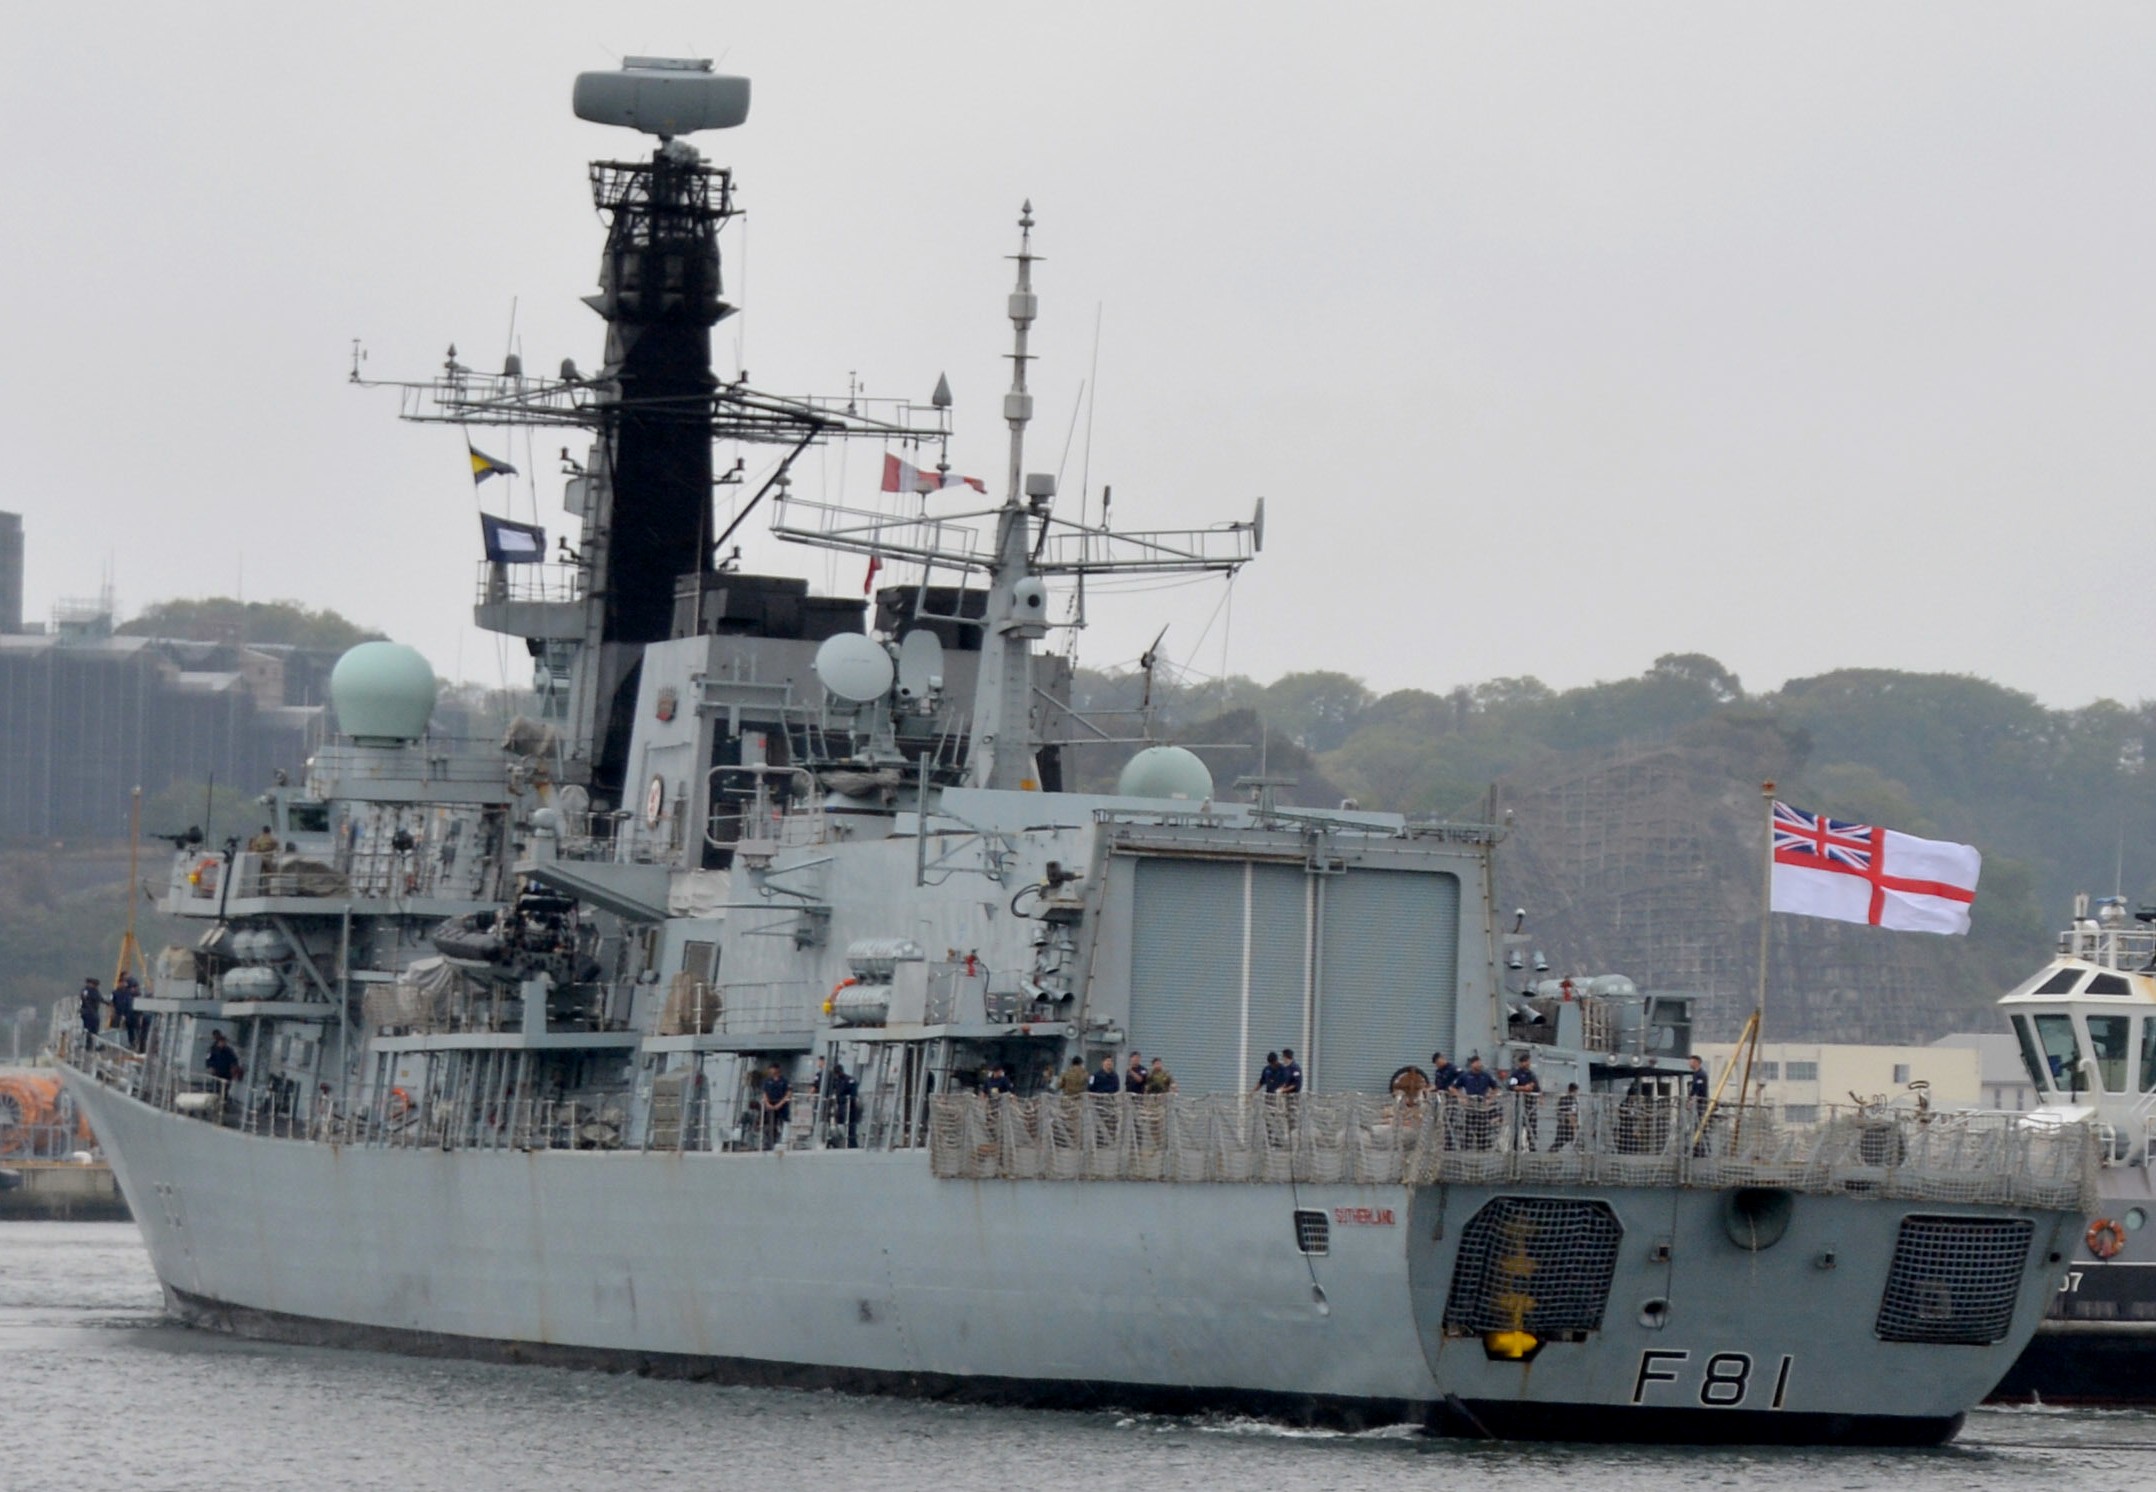 f-81 hms sutherland type 23 duke class guided missile frigate ffg royal navy 54